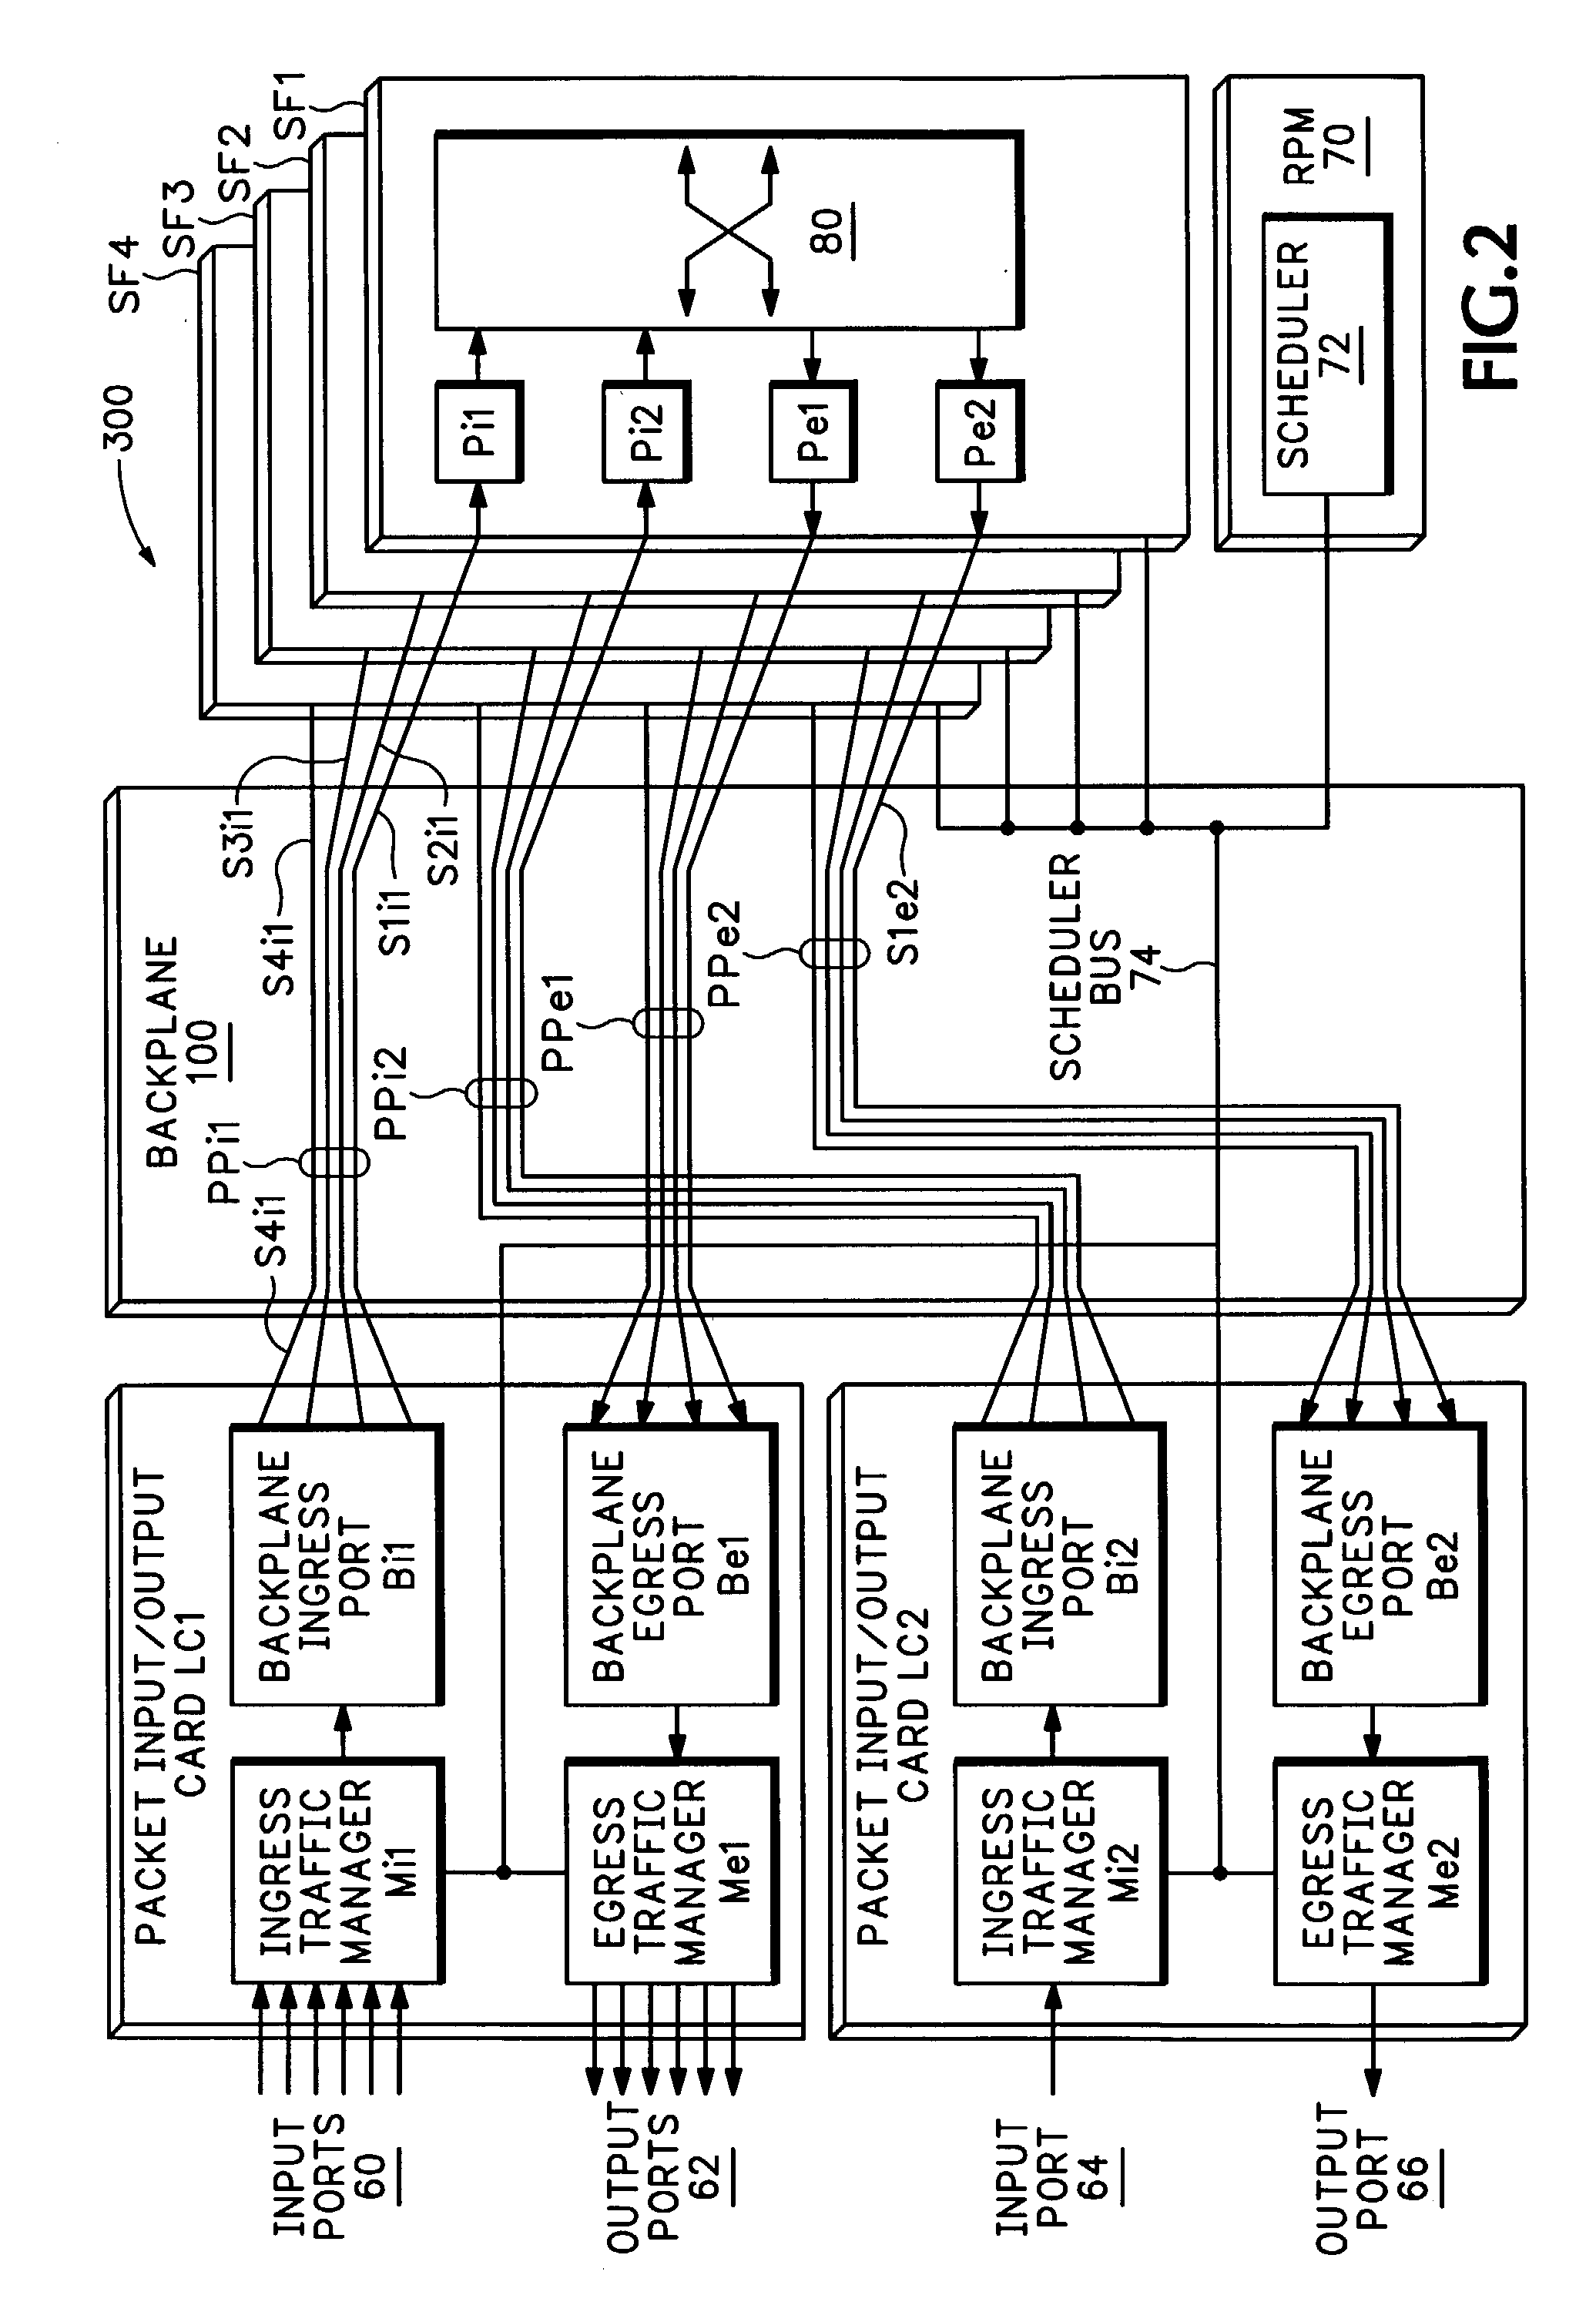 Epoch-based packet switching